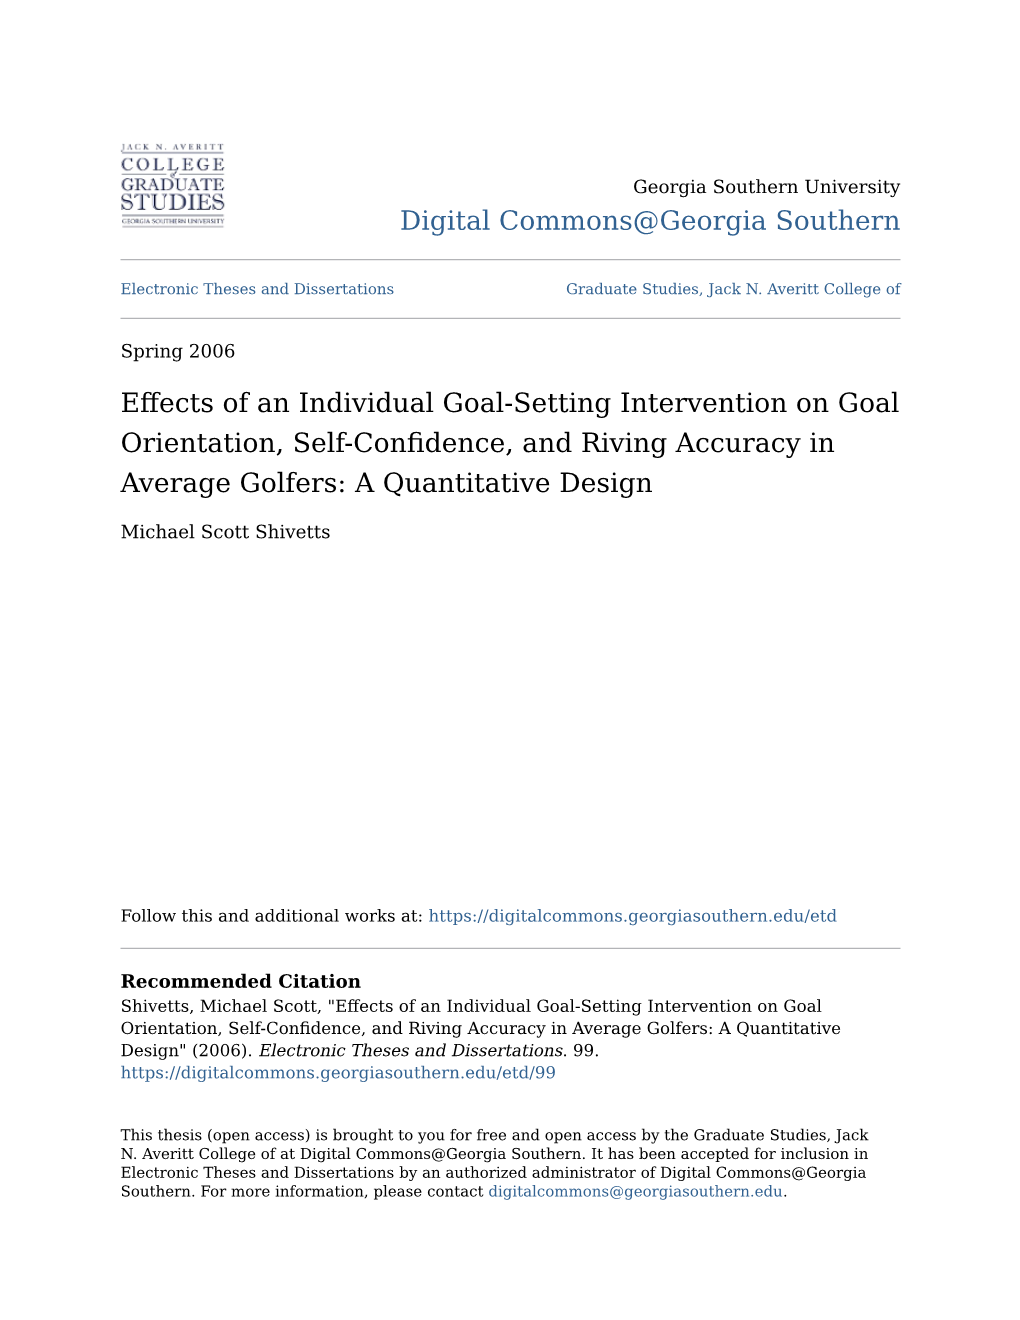 Effects of an Individual Goal-Setting Intervention on Goal Orientation, Self-Confidence, and Riving Accuracy in Average Golfers: a Quantitative Design